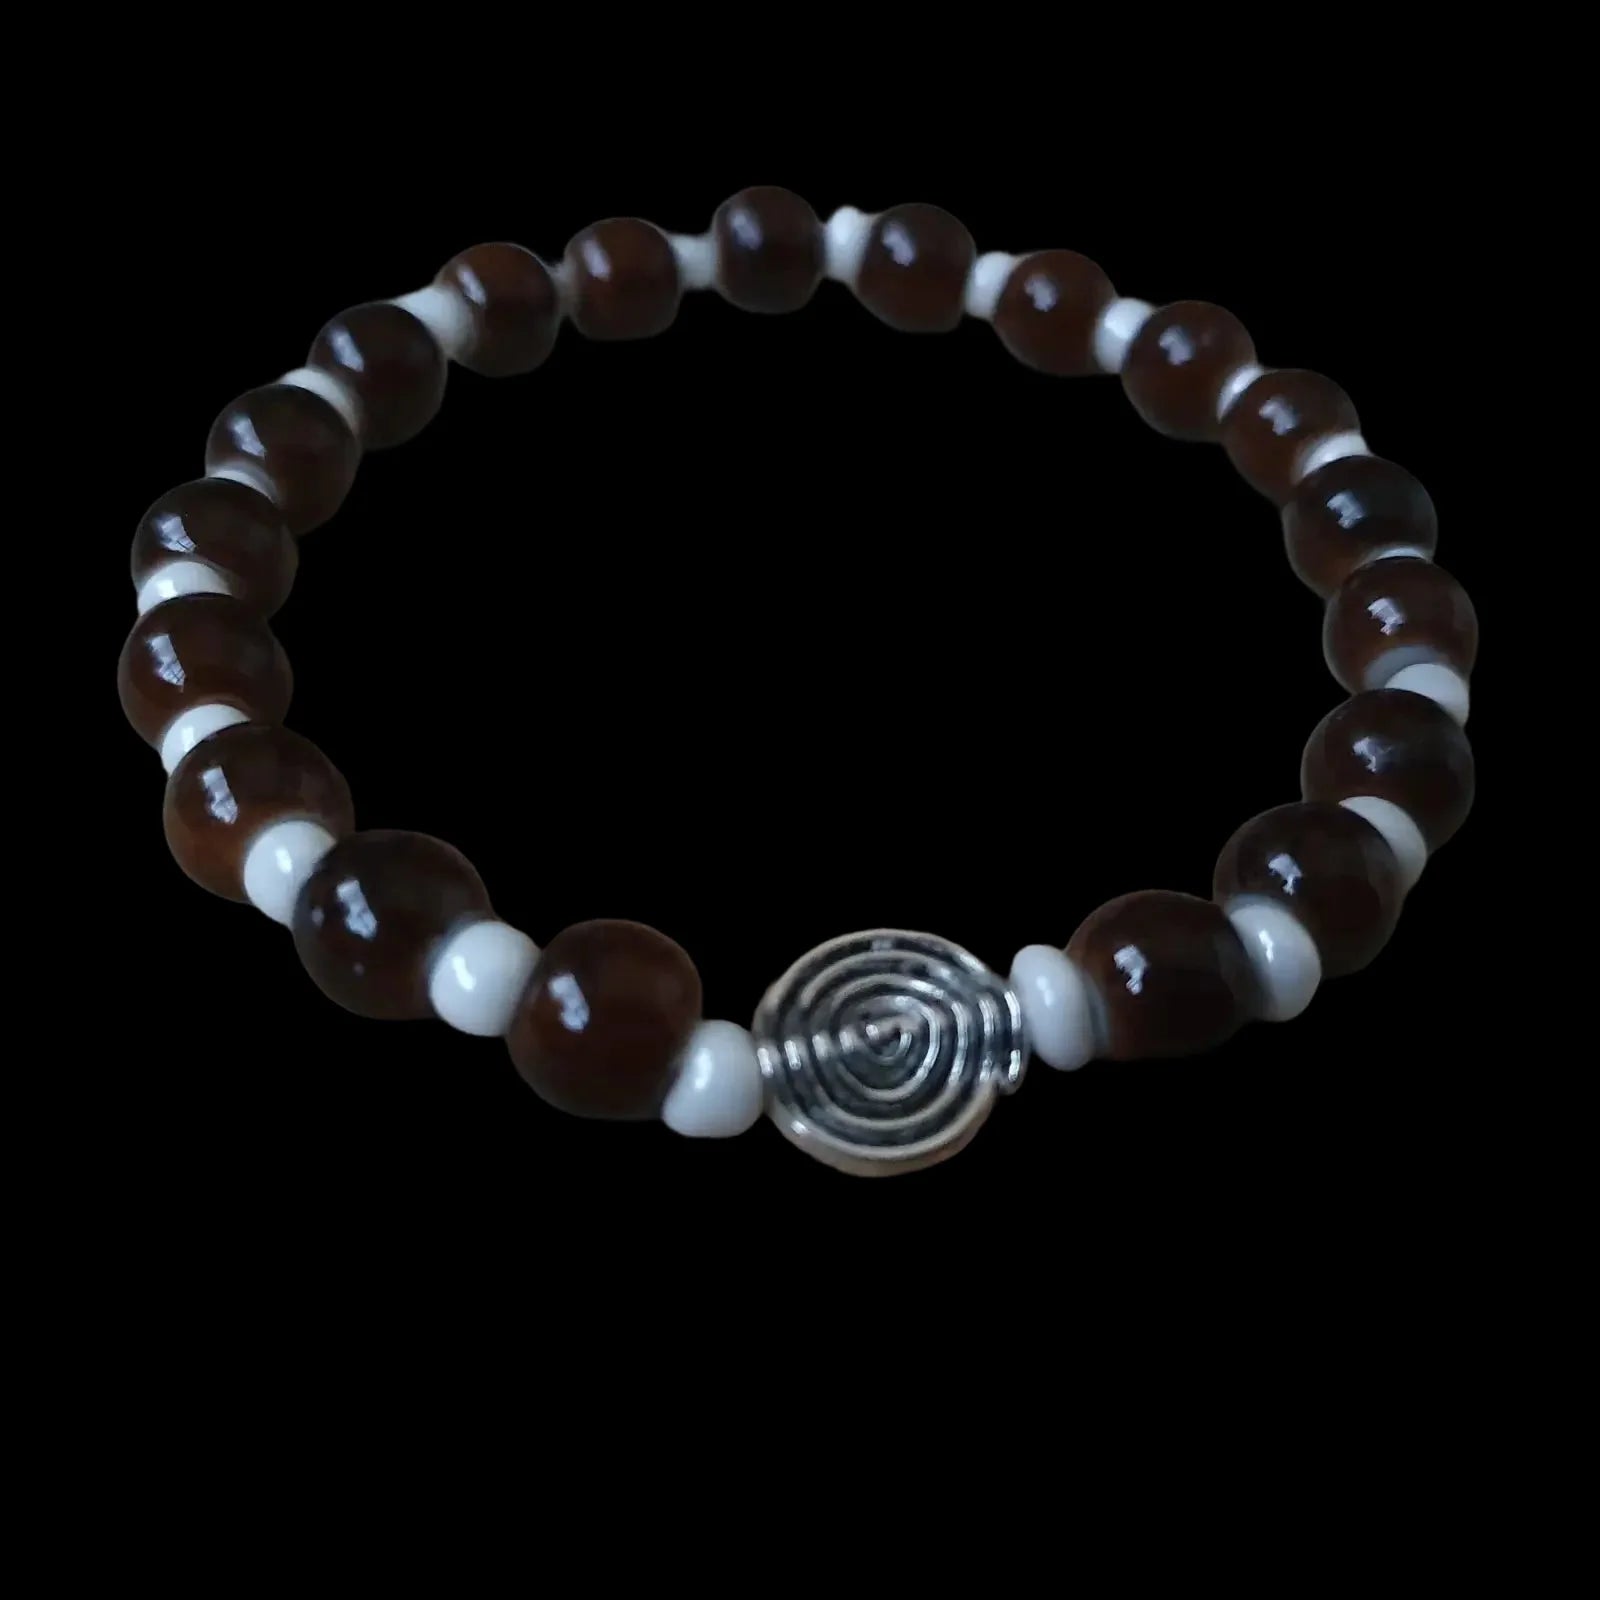 Unique Handmade Crafted Beaded Bracelet Spiral Charm Gift